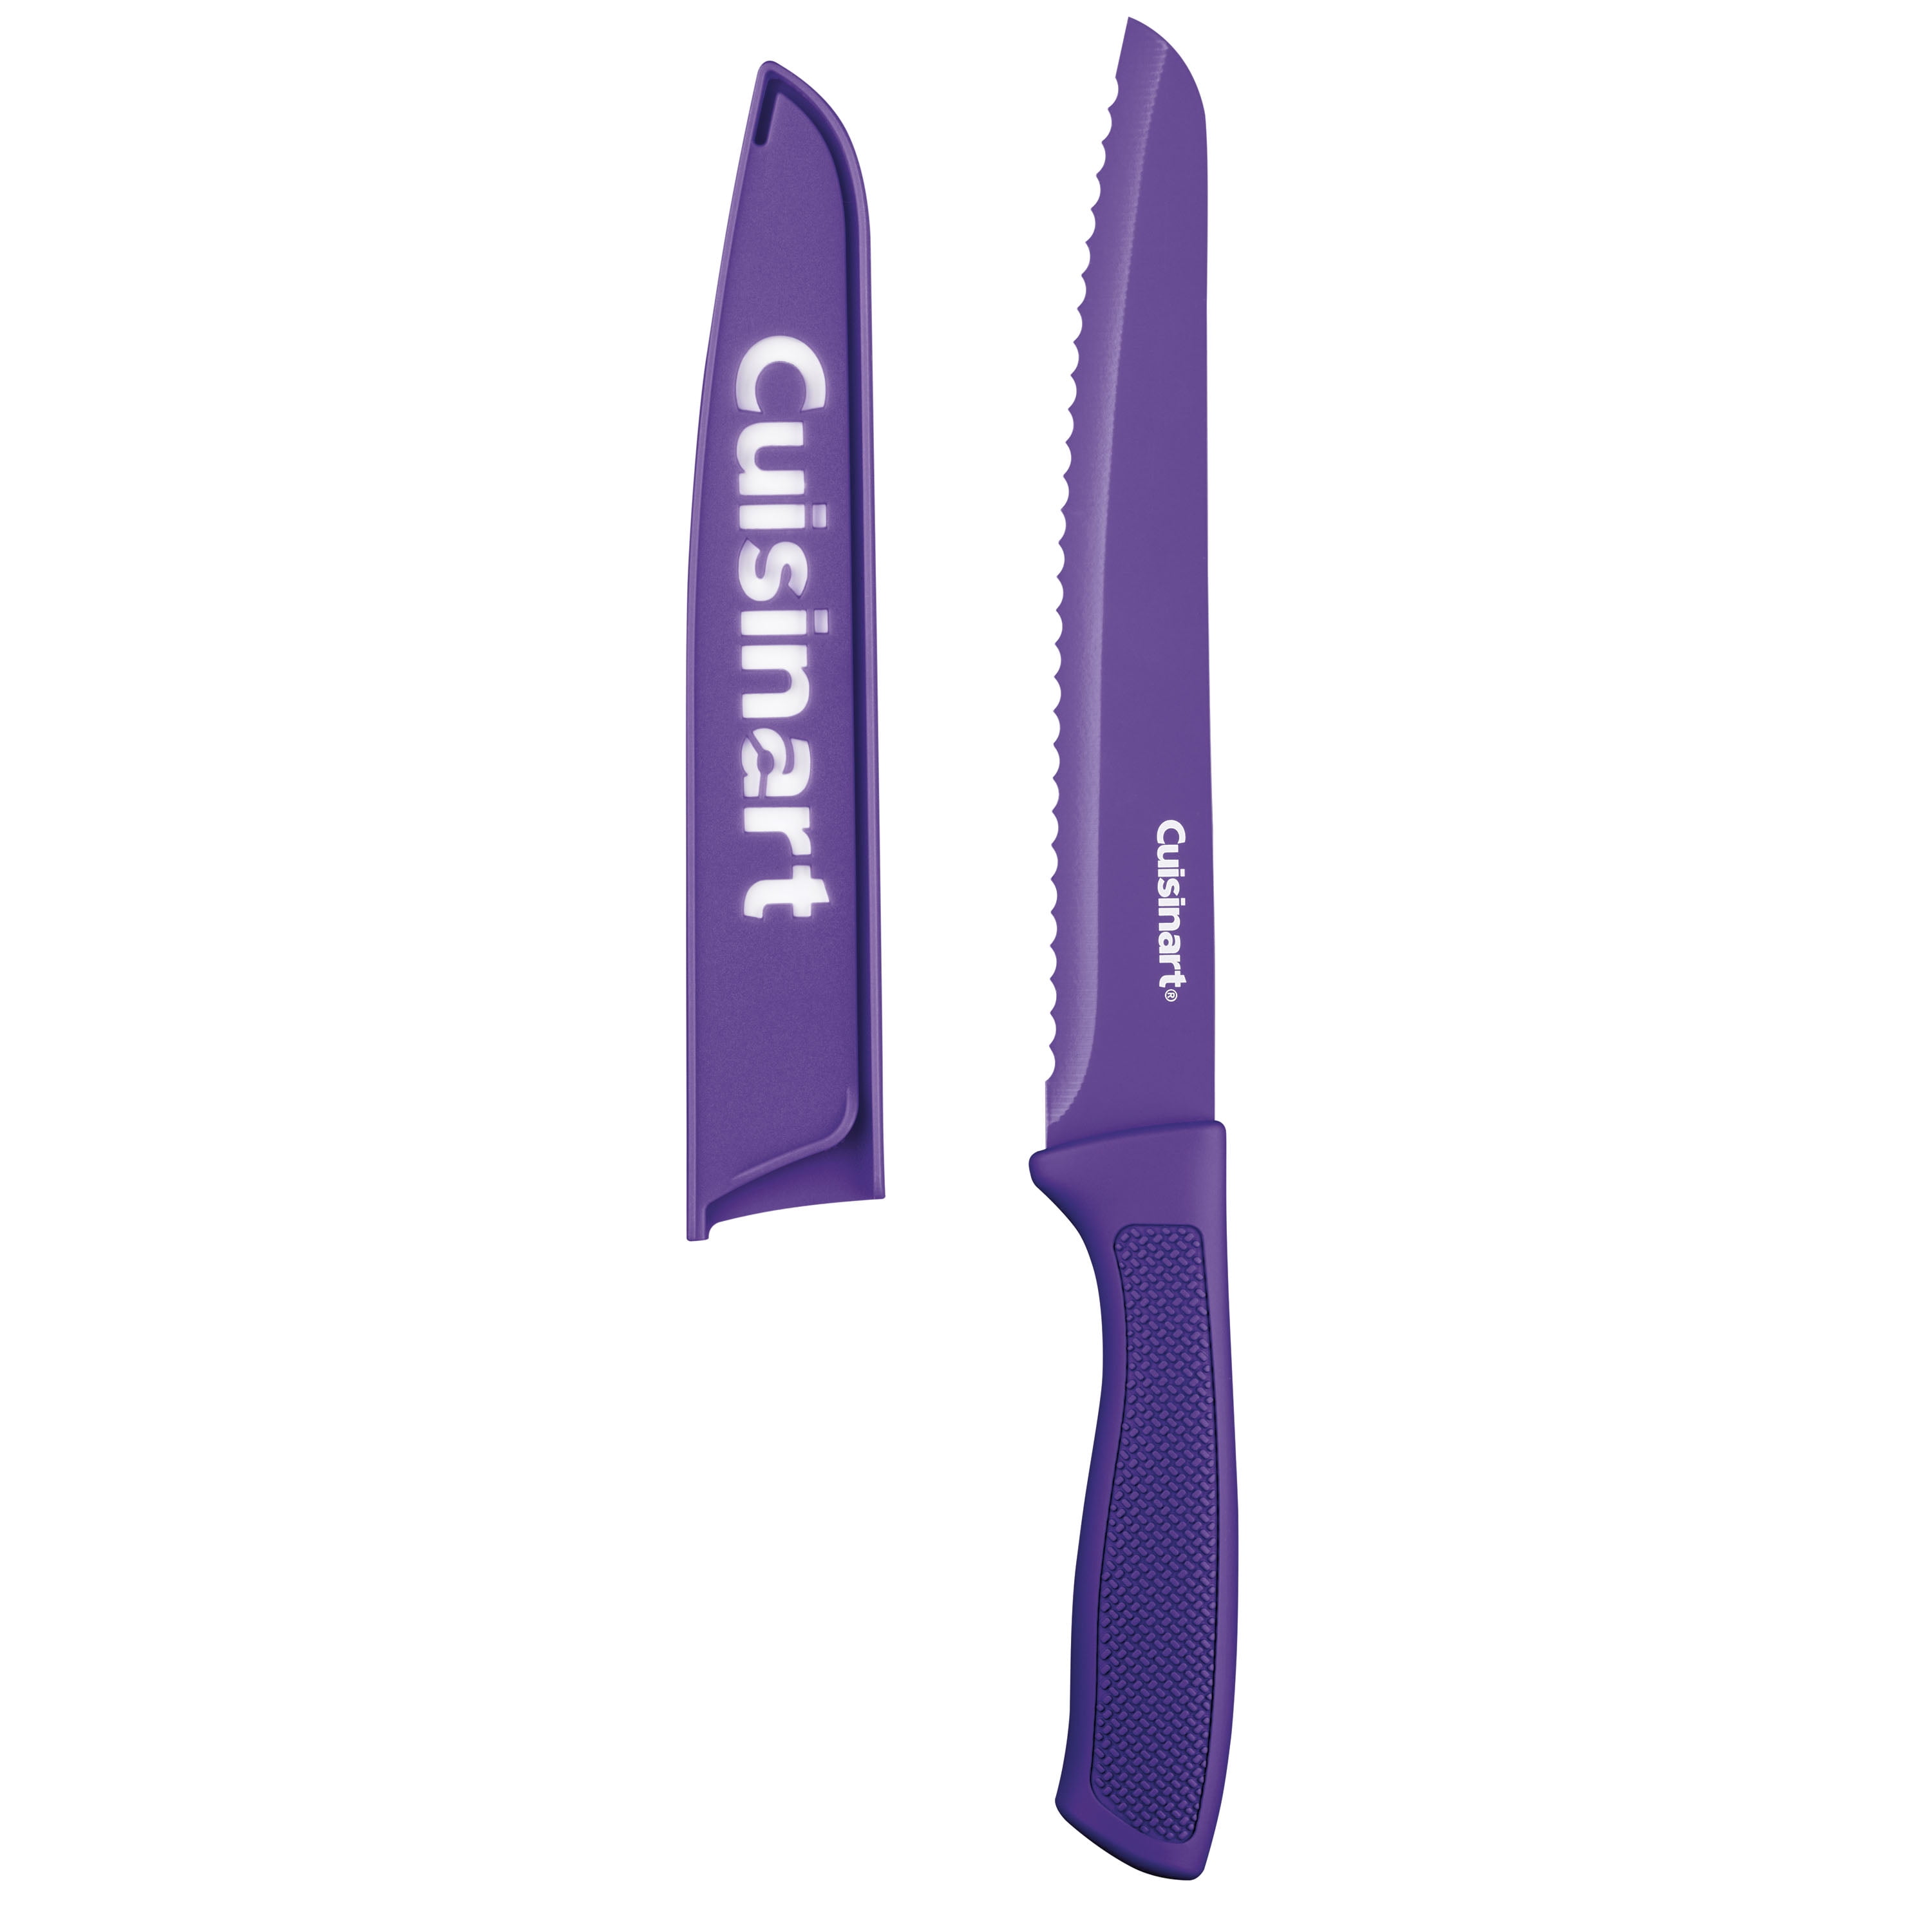 5 CUISINART COLOR CERAMIC COATED KITCHEN KNIVES & SHEATHS, C7712PMCPC